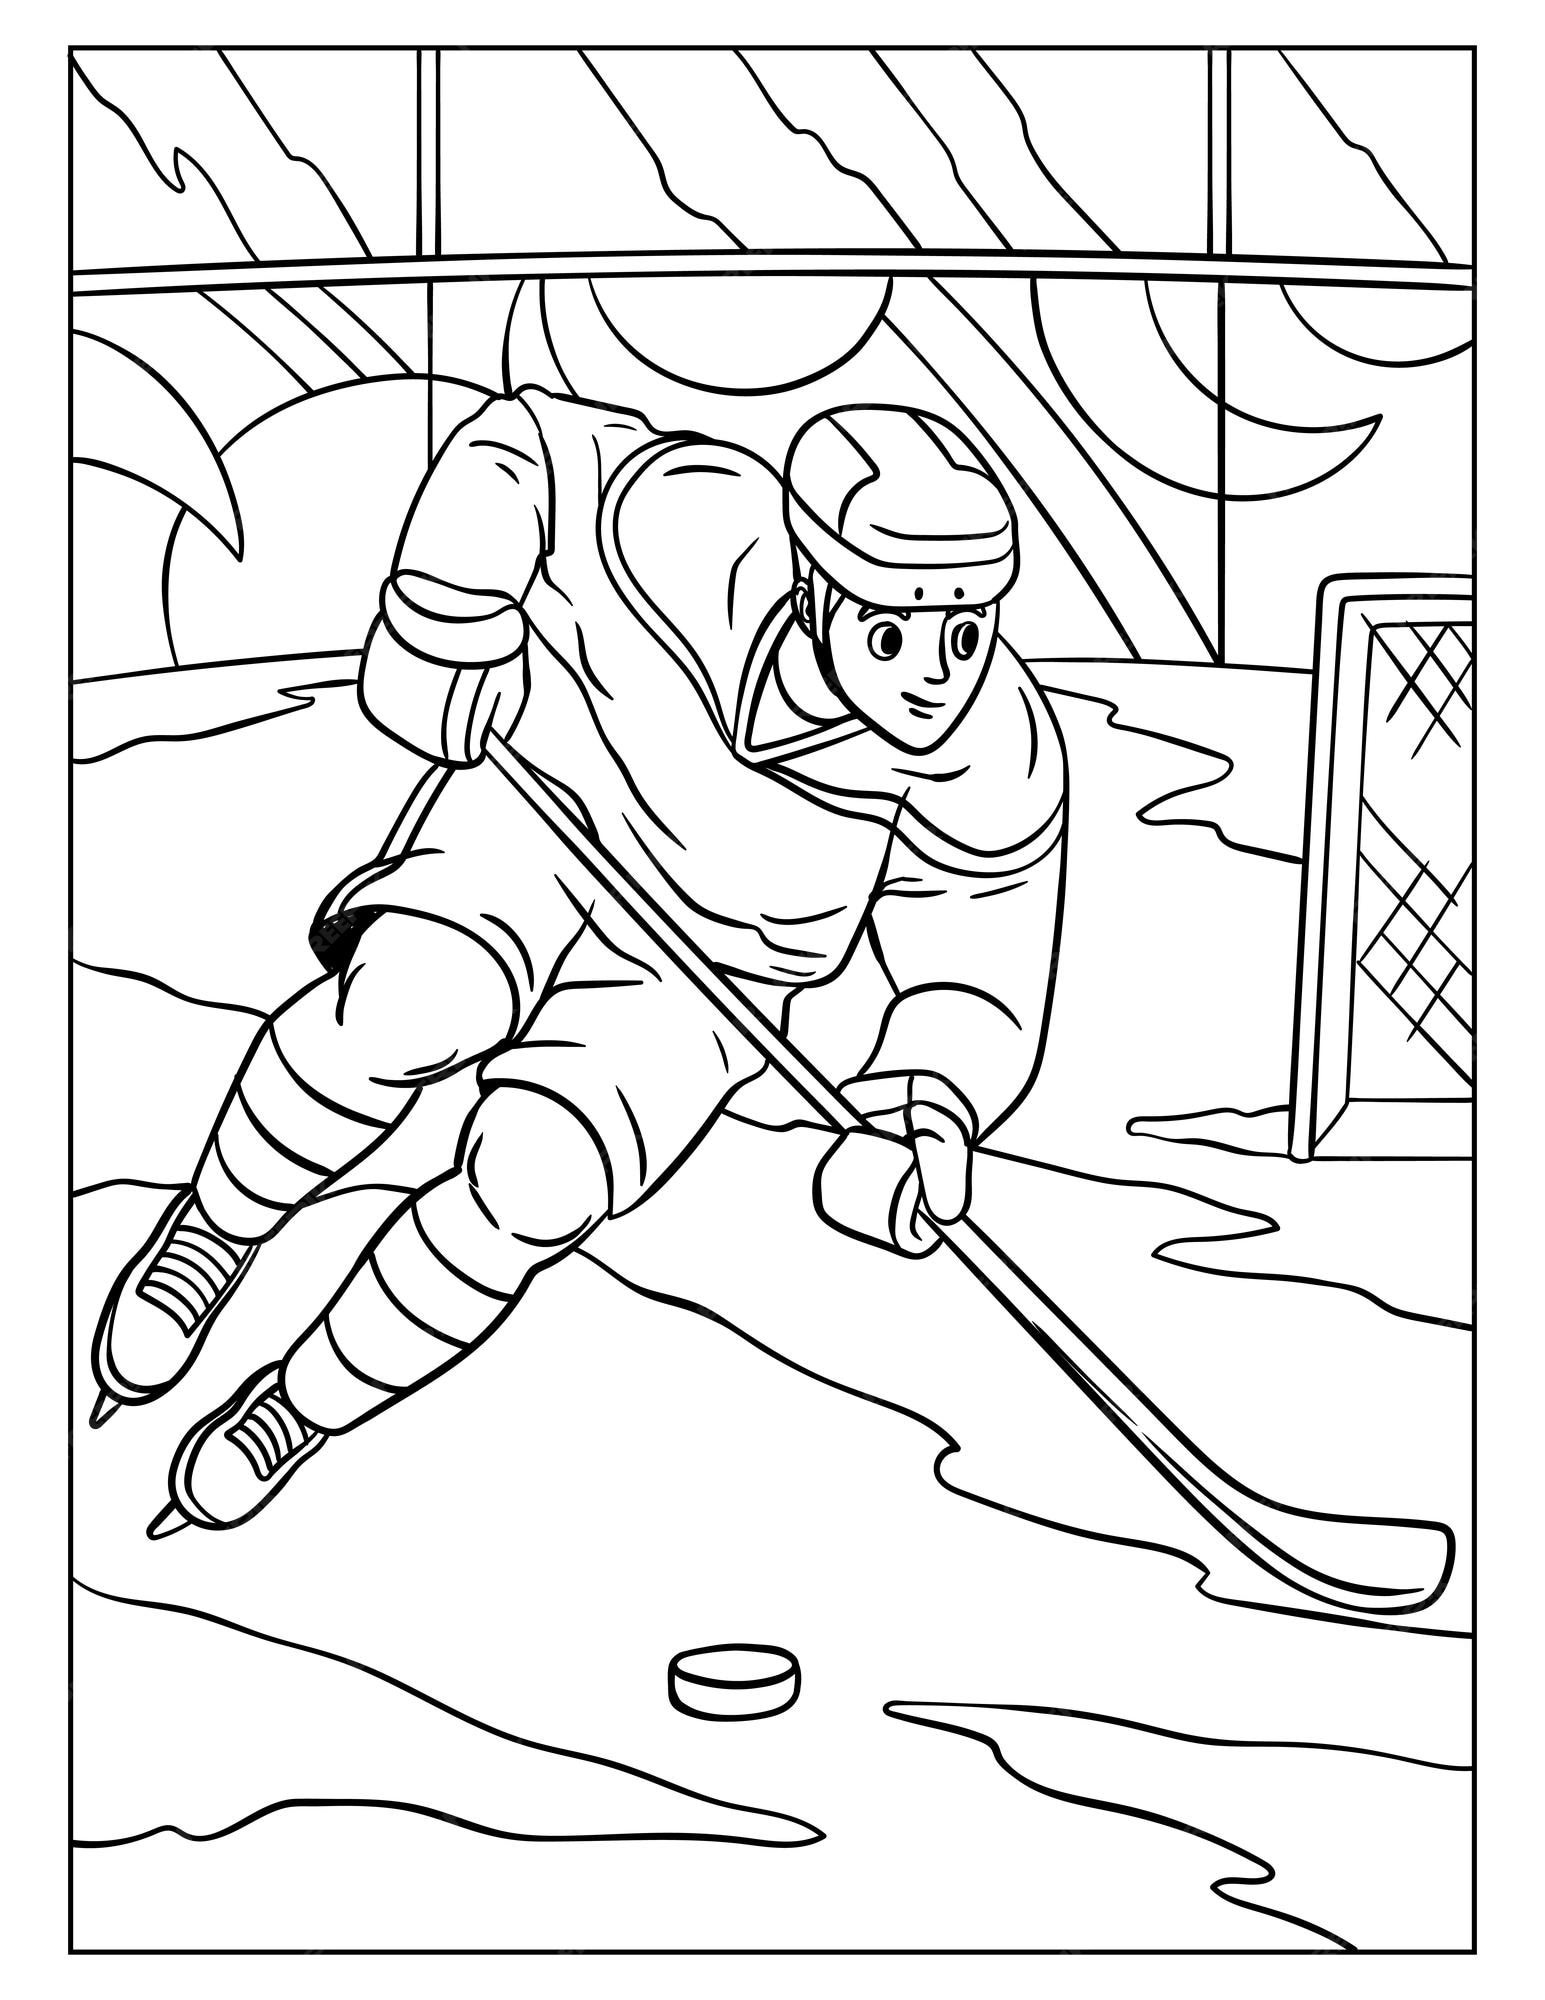 Premium vector ice hockey coloring page for kids